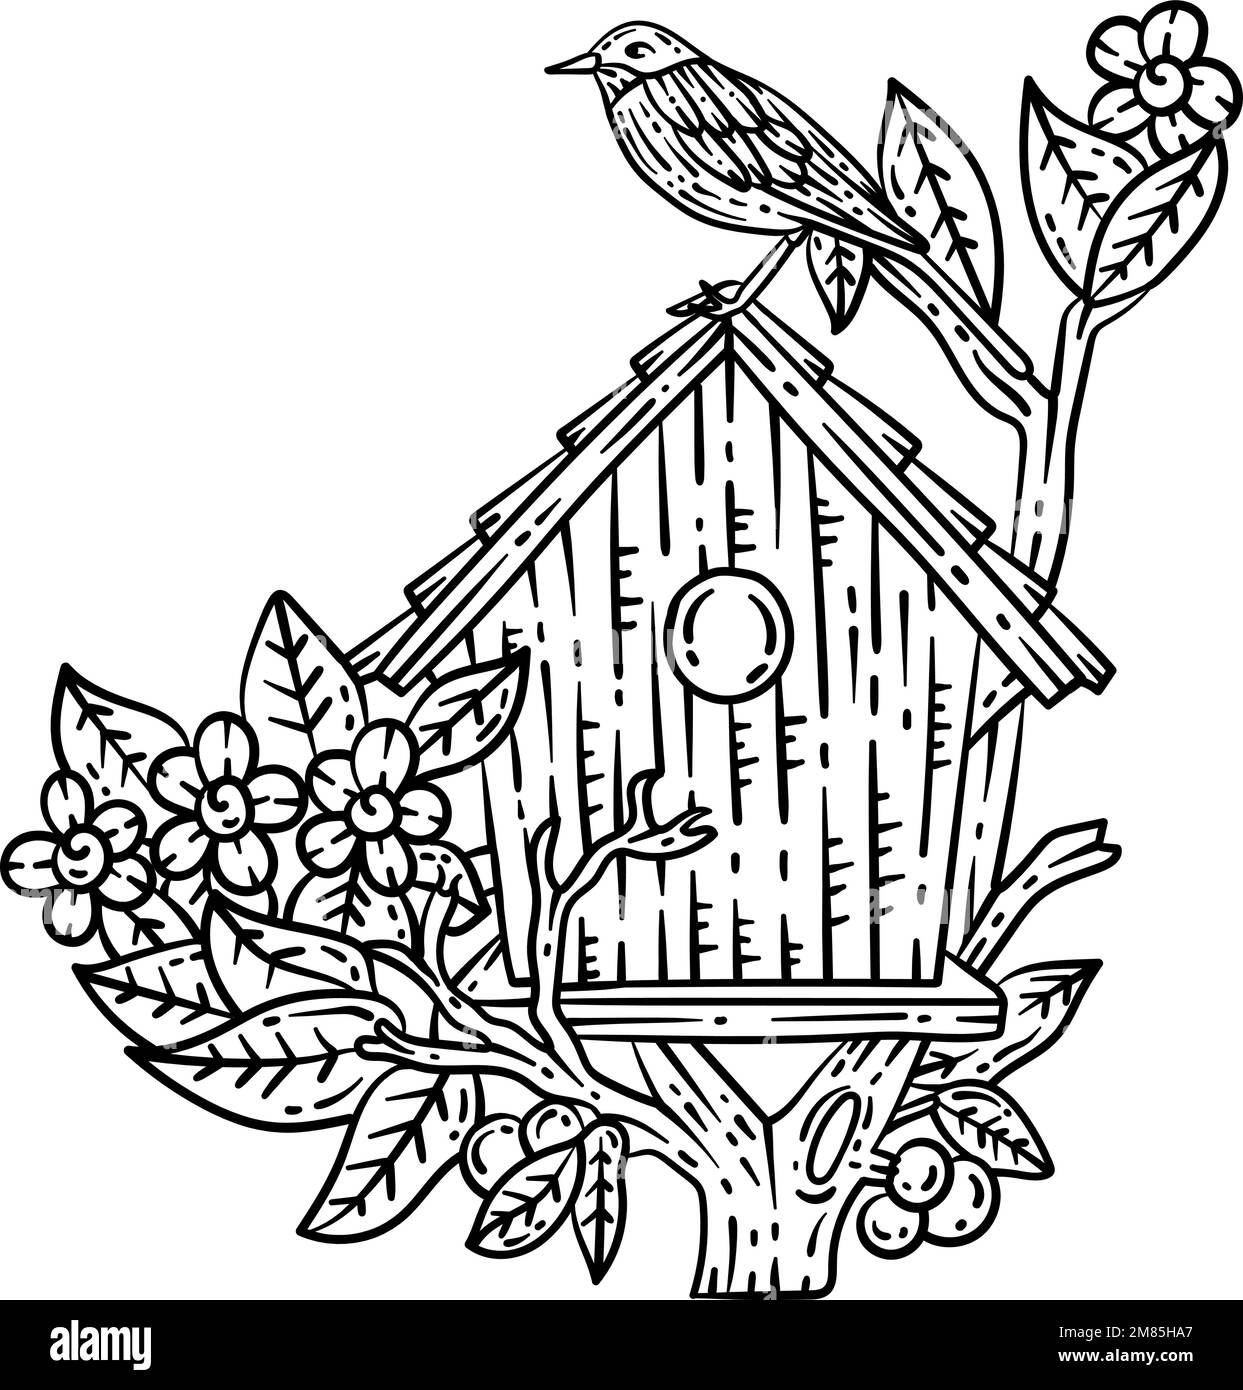 Bird House Spring Coloring Page for Adults Stock Vector